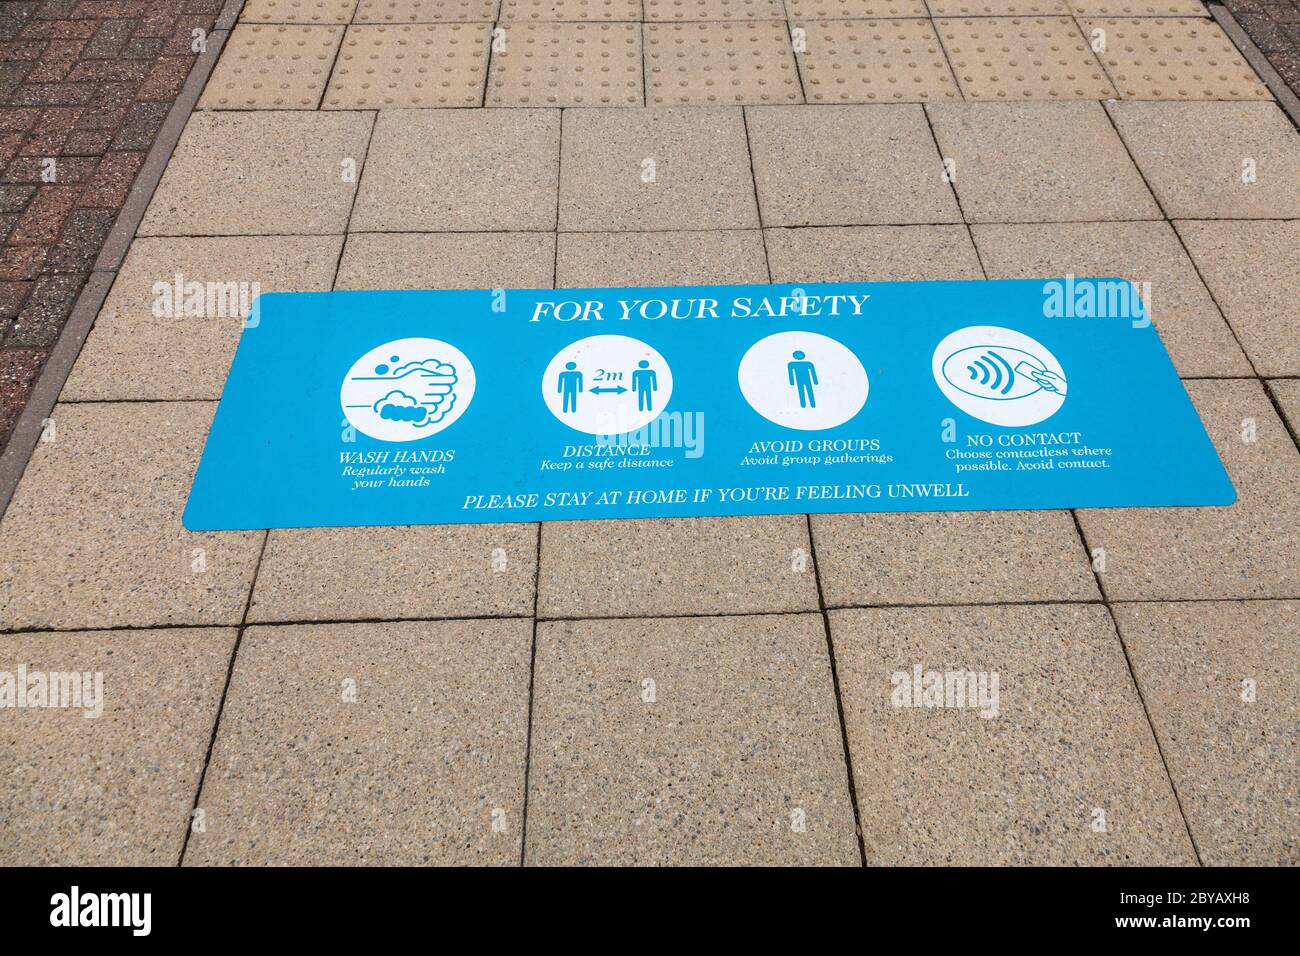 Covid 19, instructions and guidance on pavements at Teesside Park, Thornaby, Stockton on Tees, England, UK Stock Photo